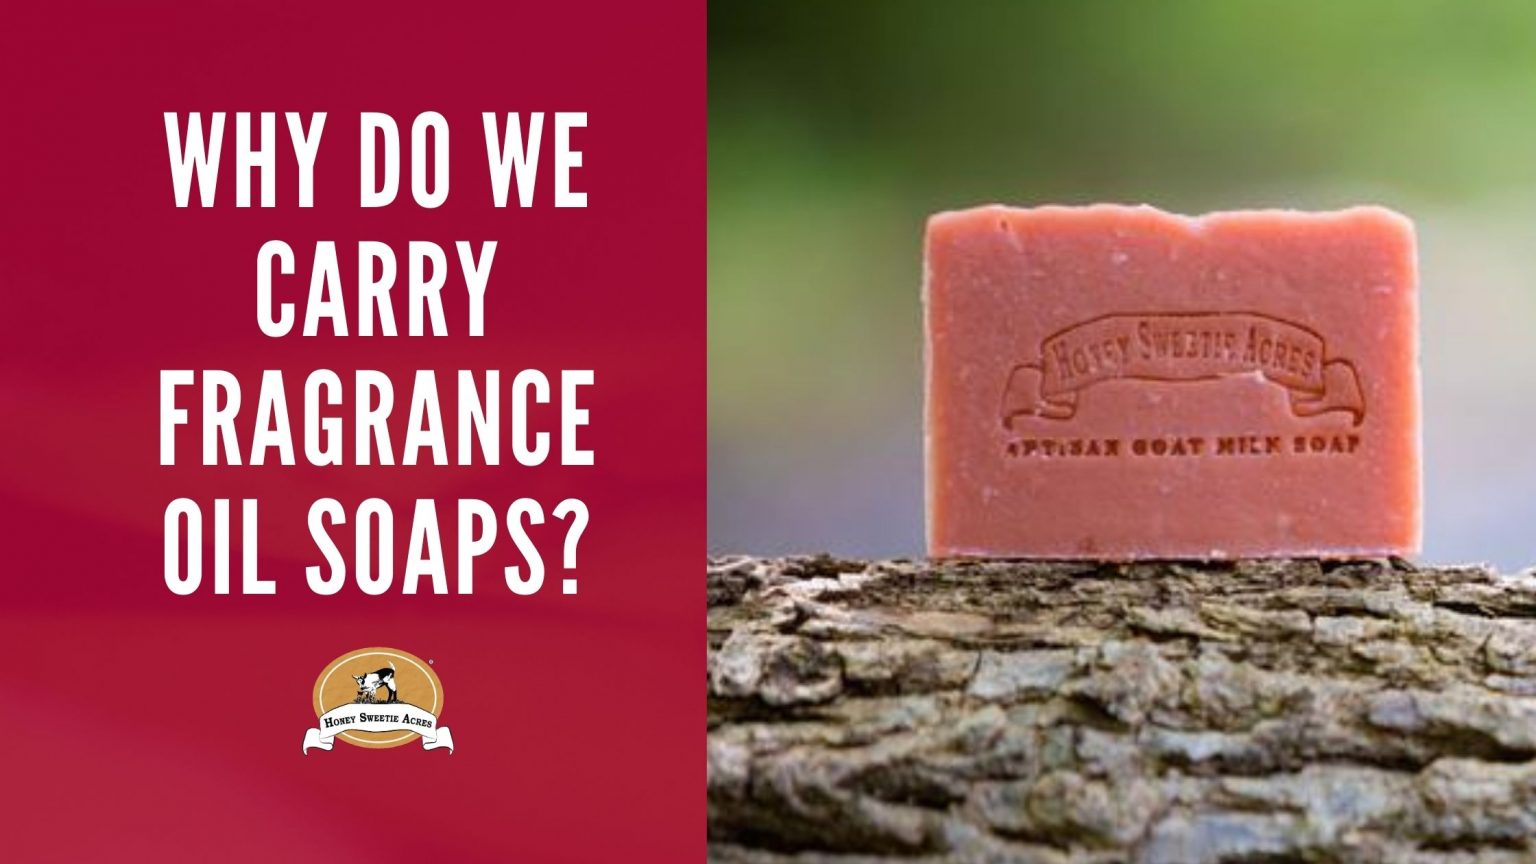 Why Do We Carry Fragrance Oil Soaps?